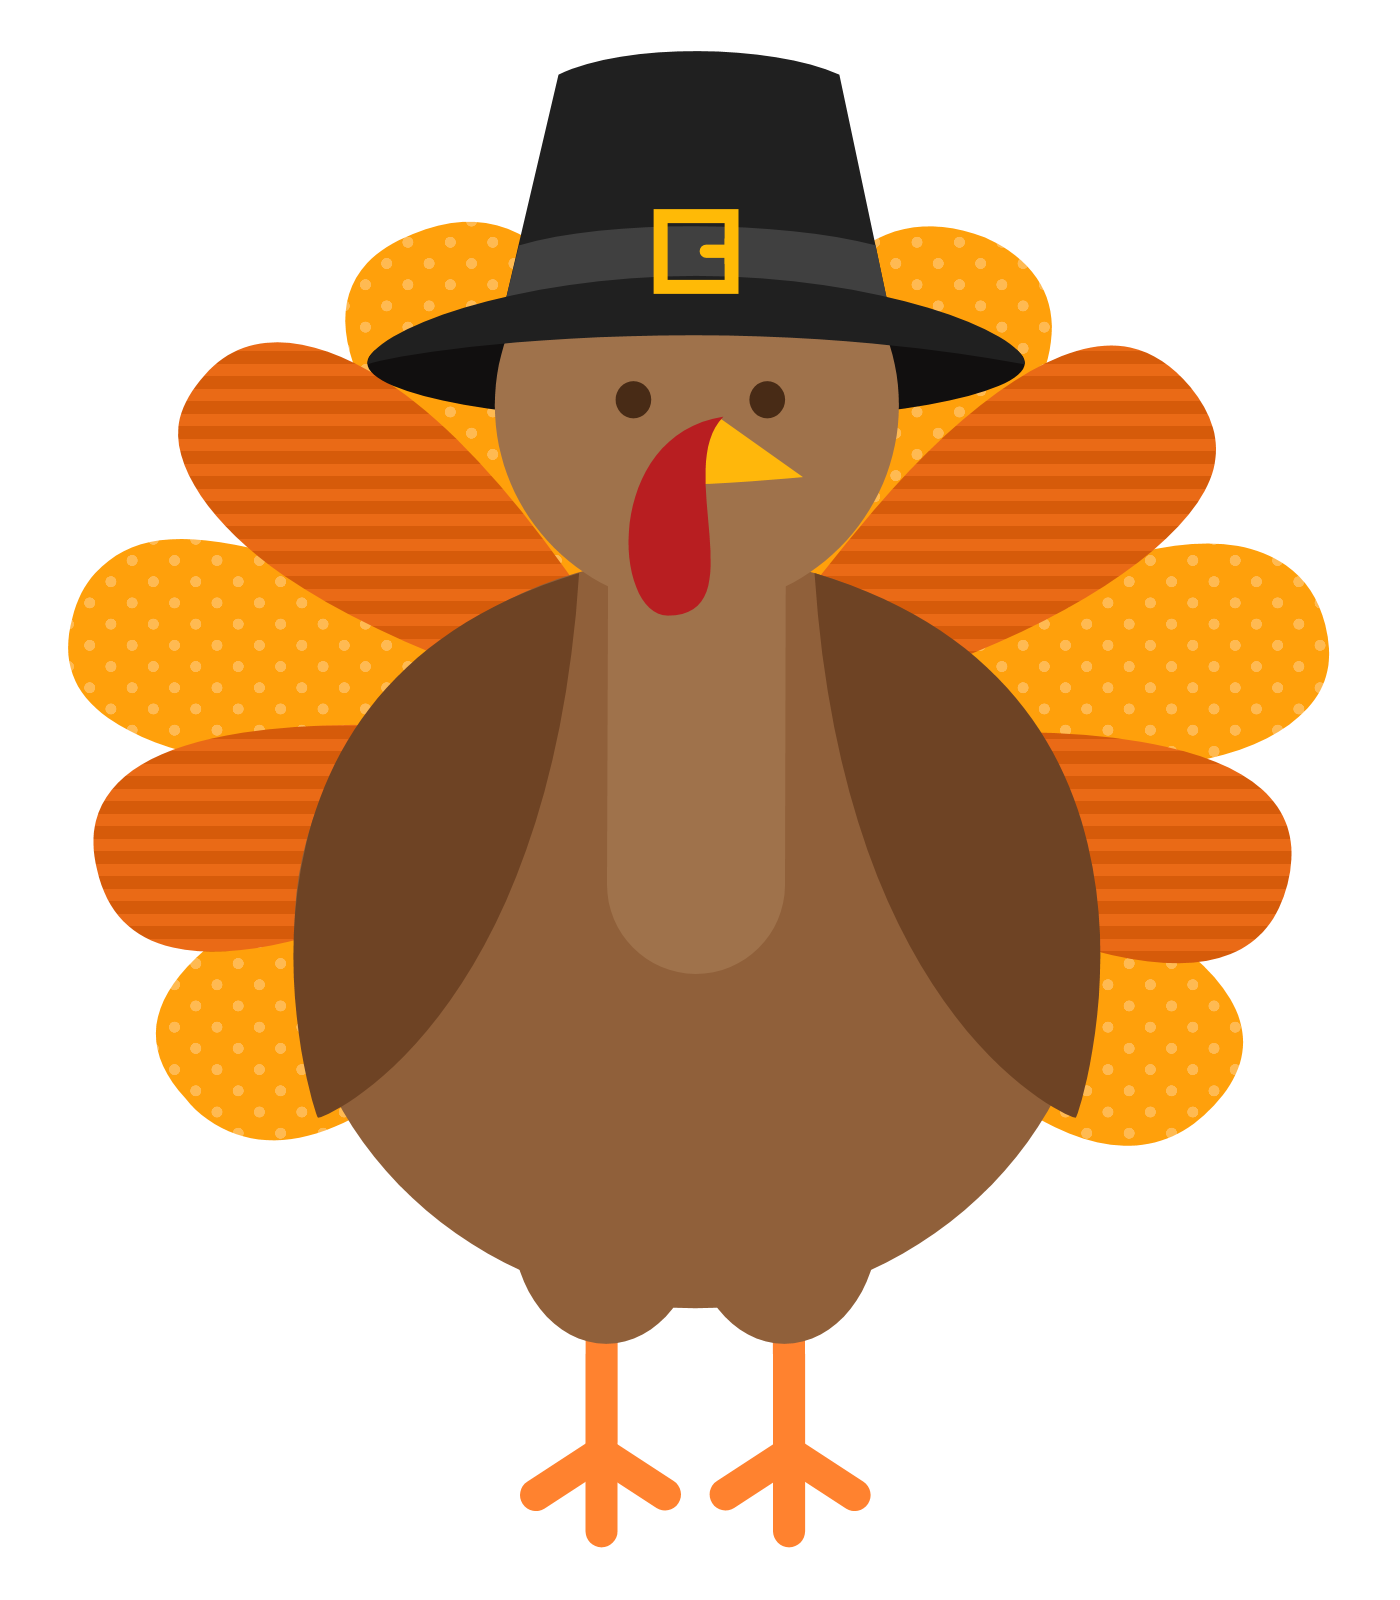 Cute Thanksgiving Turkeys Images & Pictures - Becuo